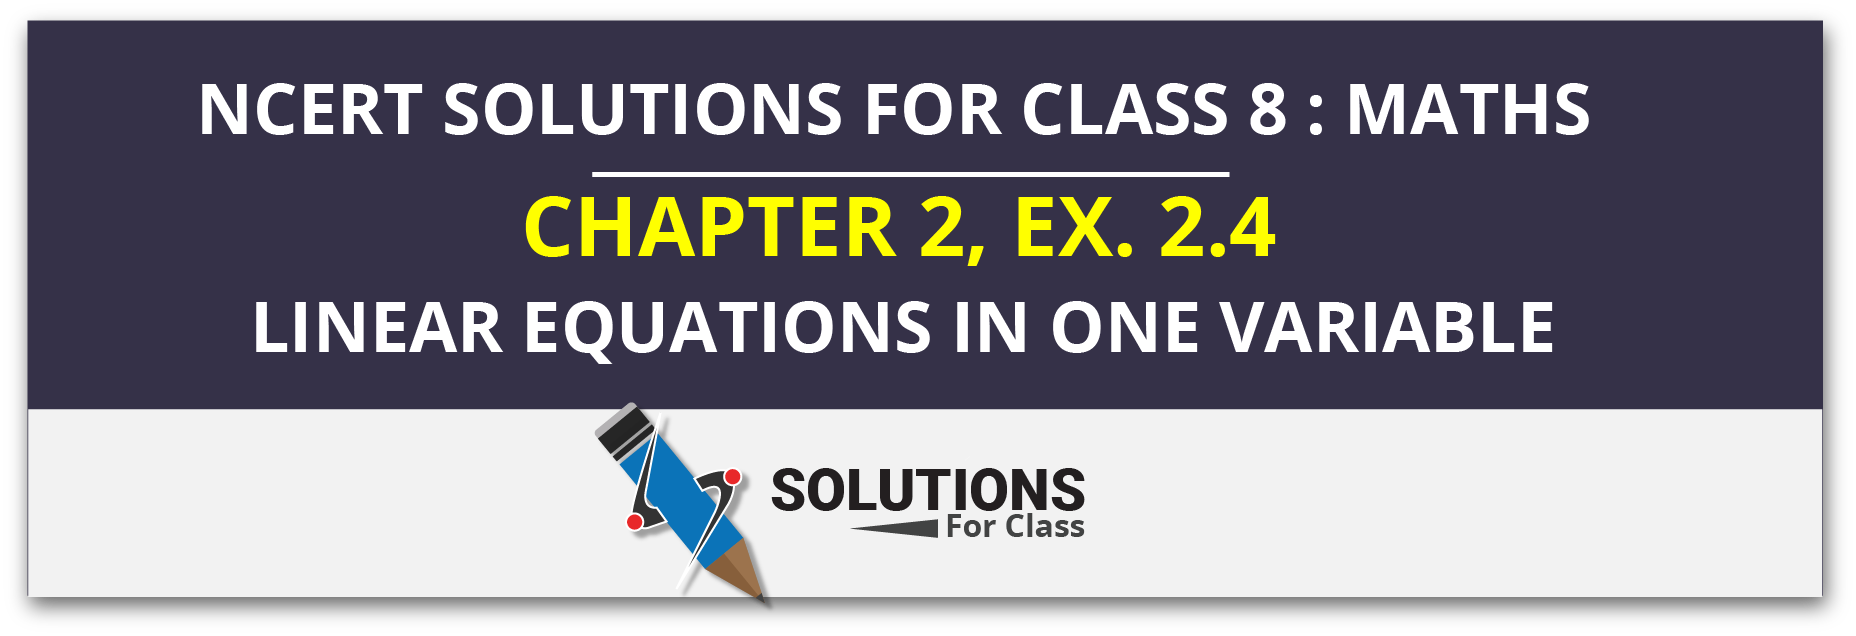 ncert-solution-for-class-8-maths-linear-equations-in-one-variable